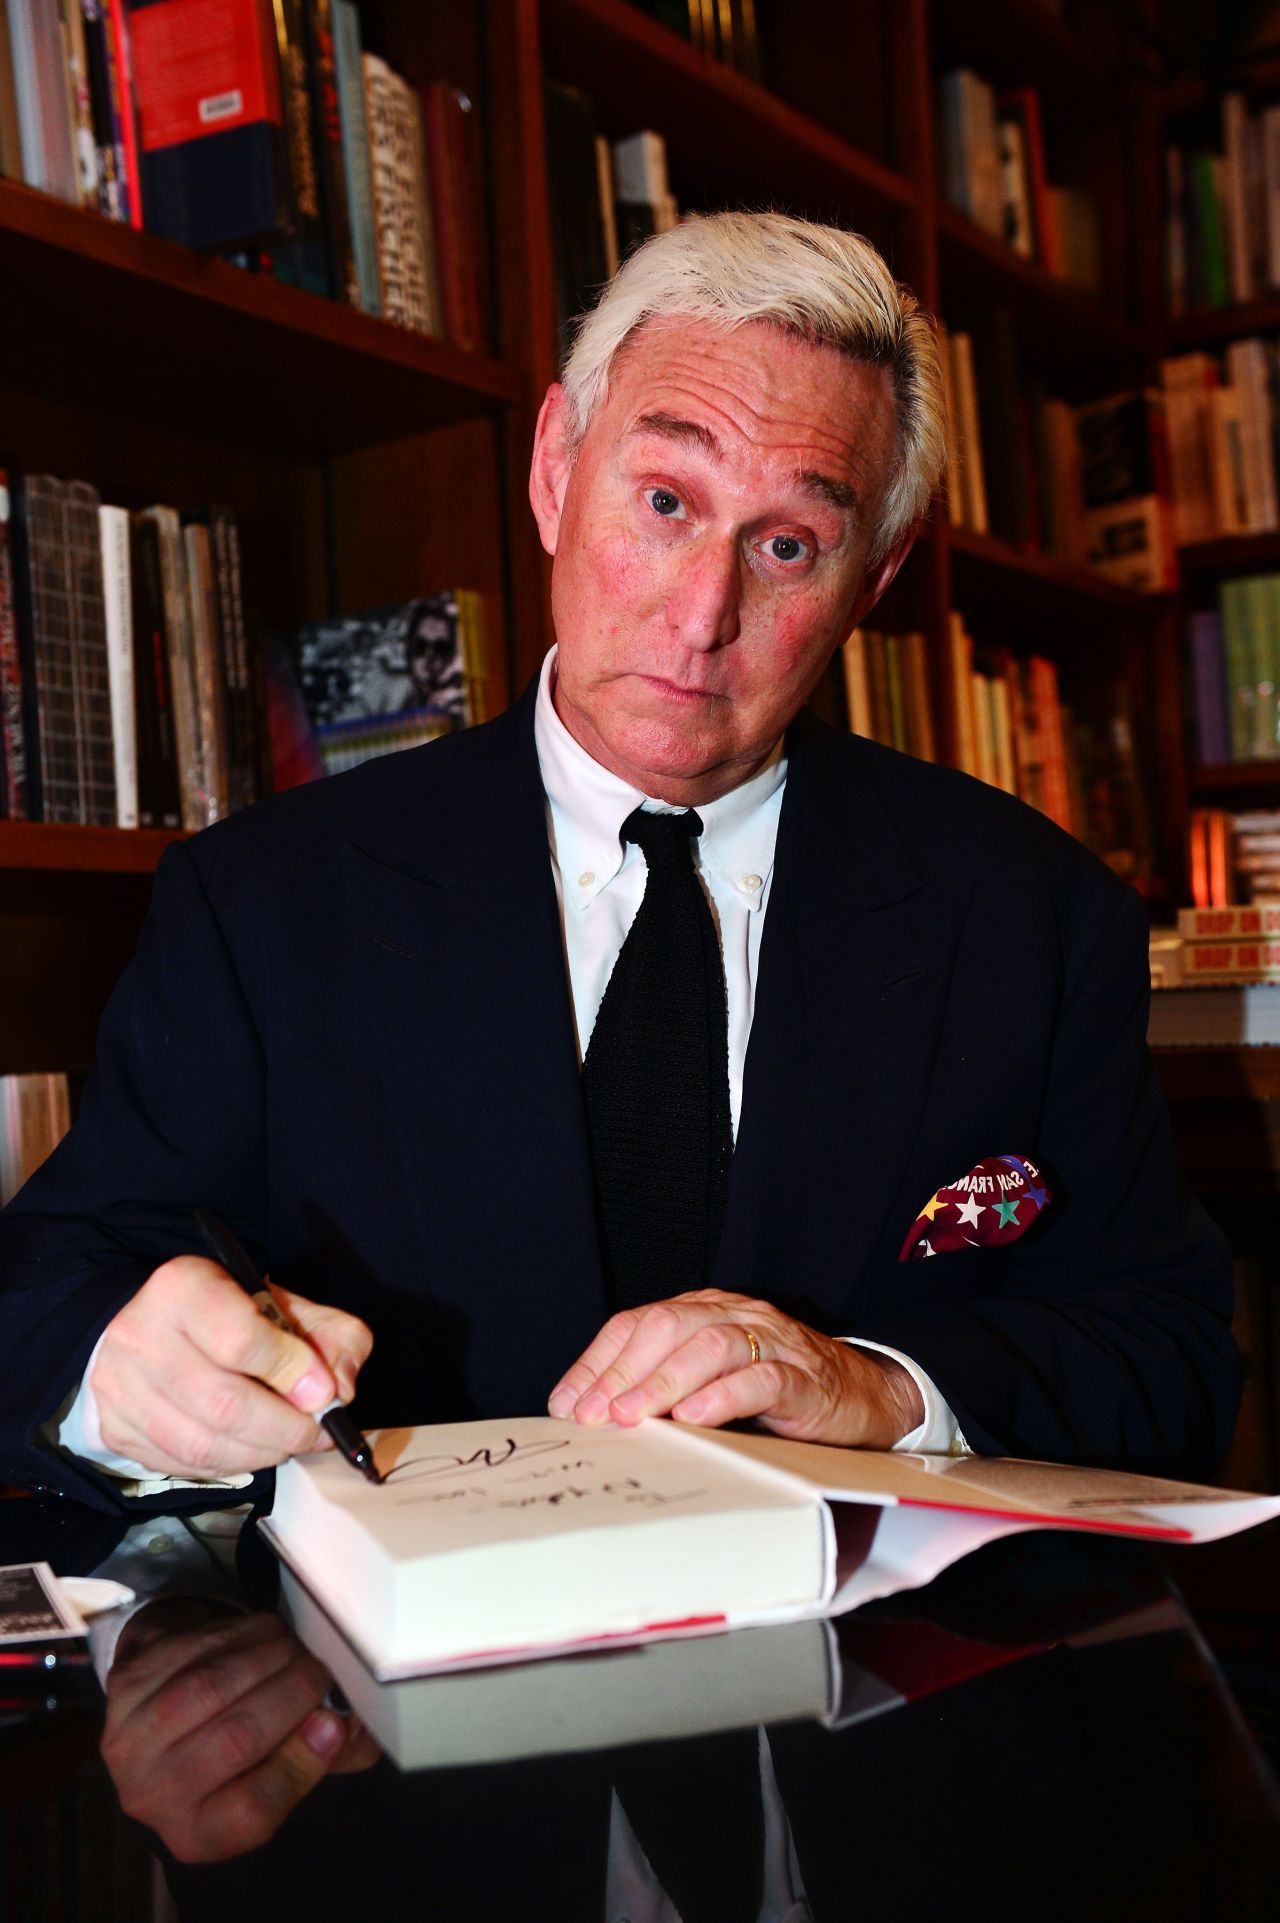 Stone signs copies of his book, "The Man Who Killed Kennedy: The Case Against LBJ" in December 2013.